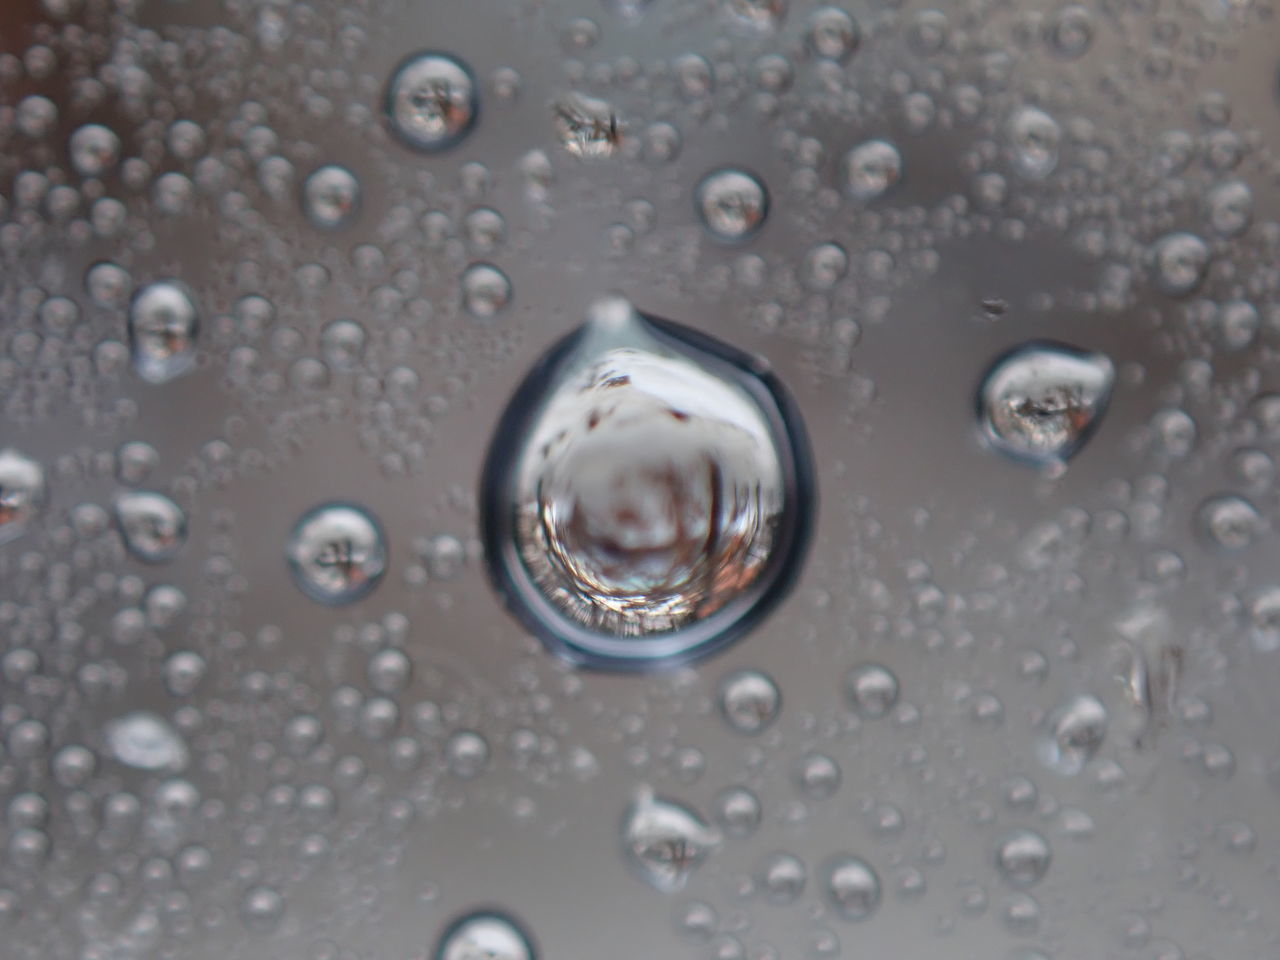 WATER DROPS ON GLASS